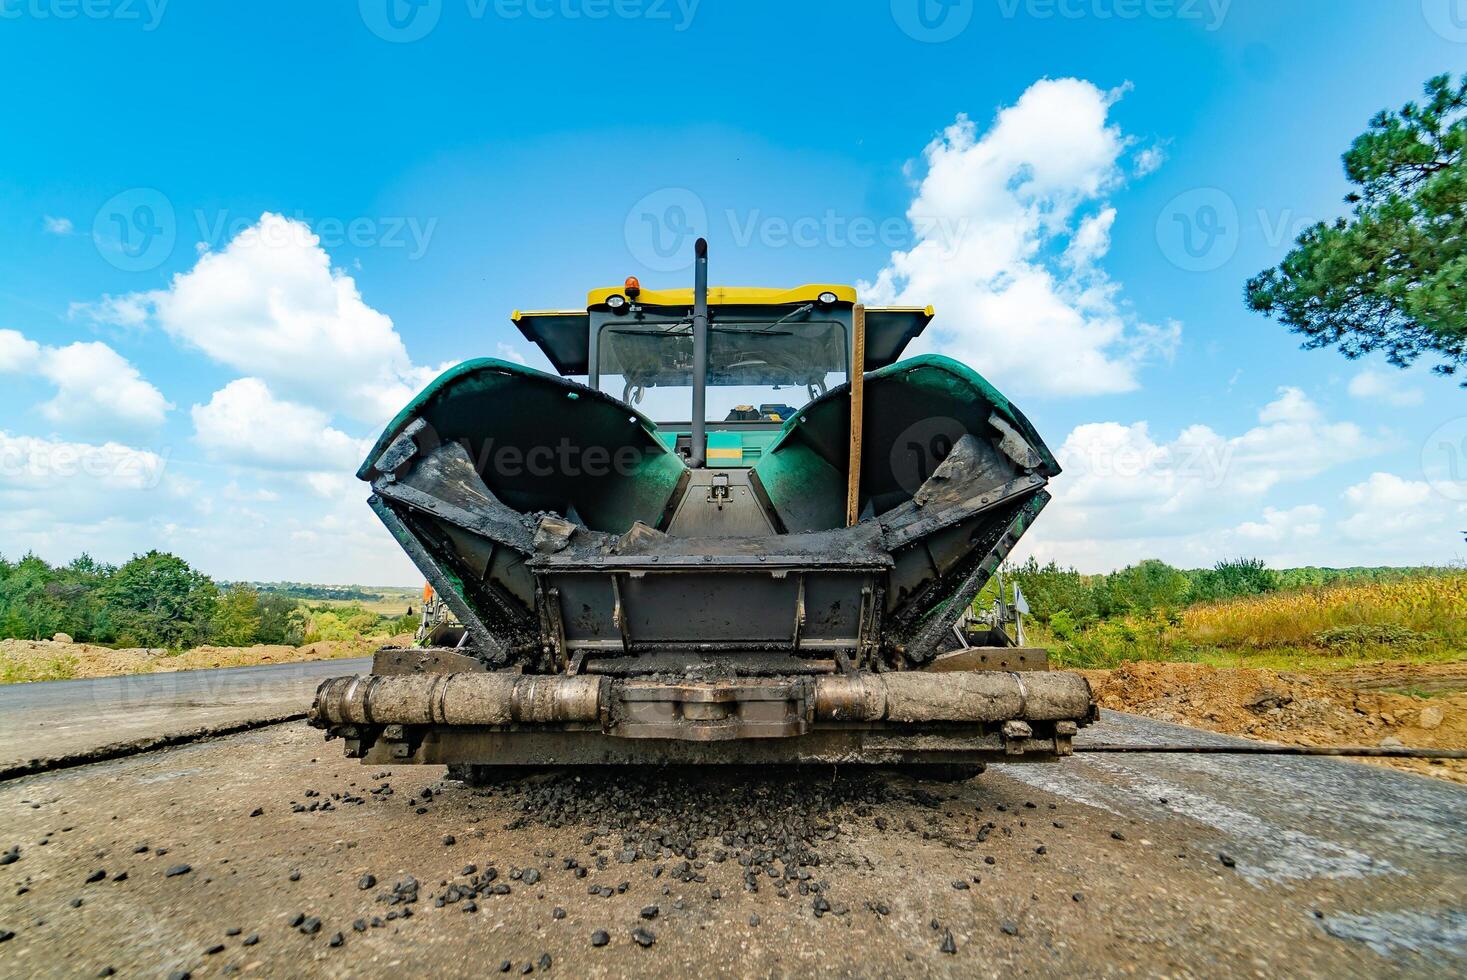 professional machine for leveling soil is on the stones and the background of road at day. Close-up photo